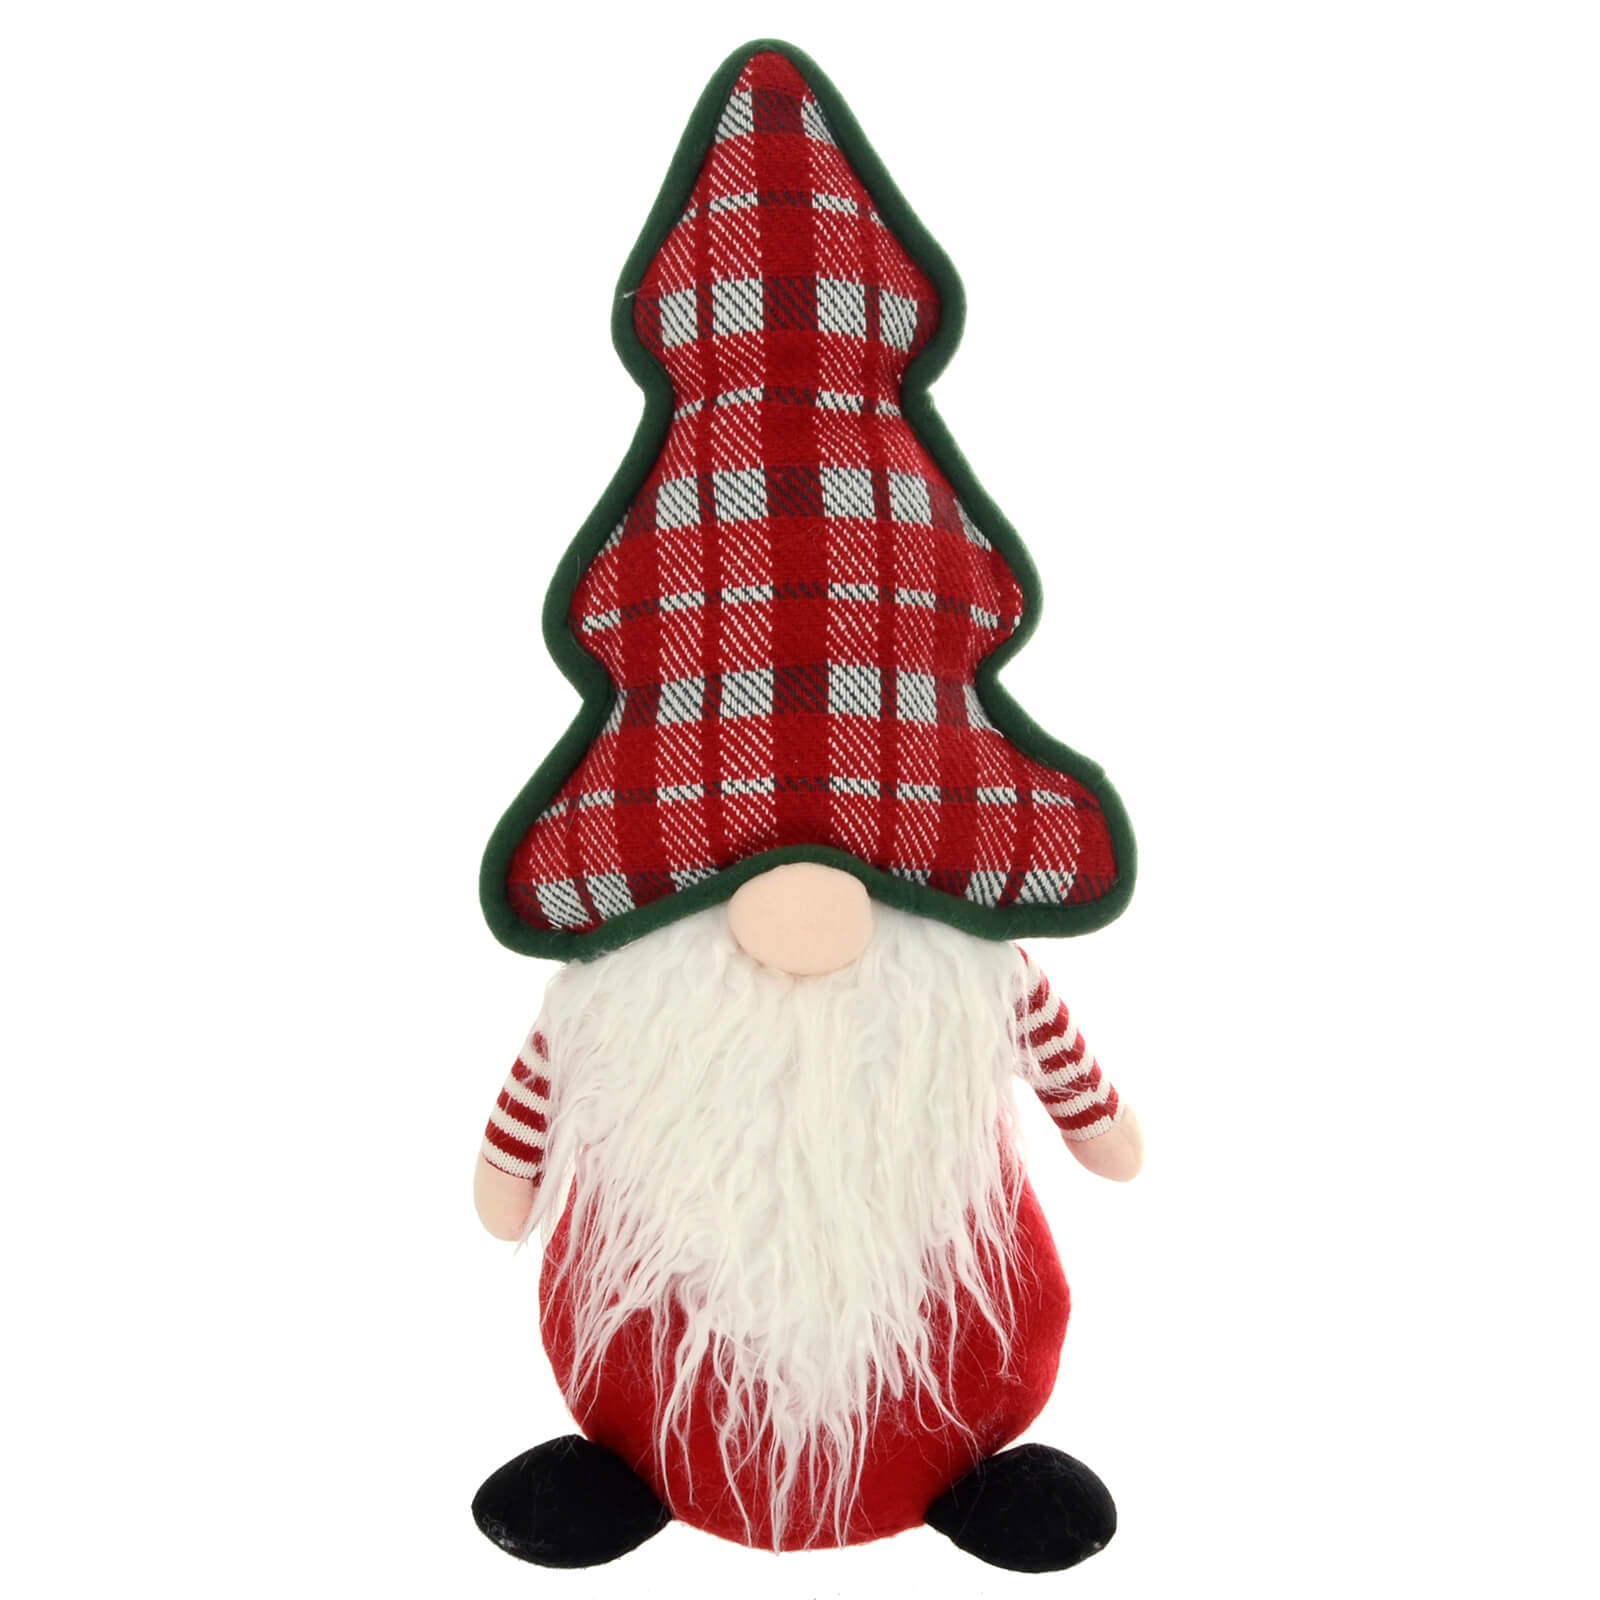 53cm gonk with red and white tartan christmas tree shaped hat